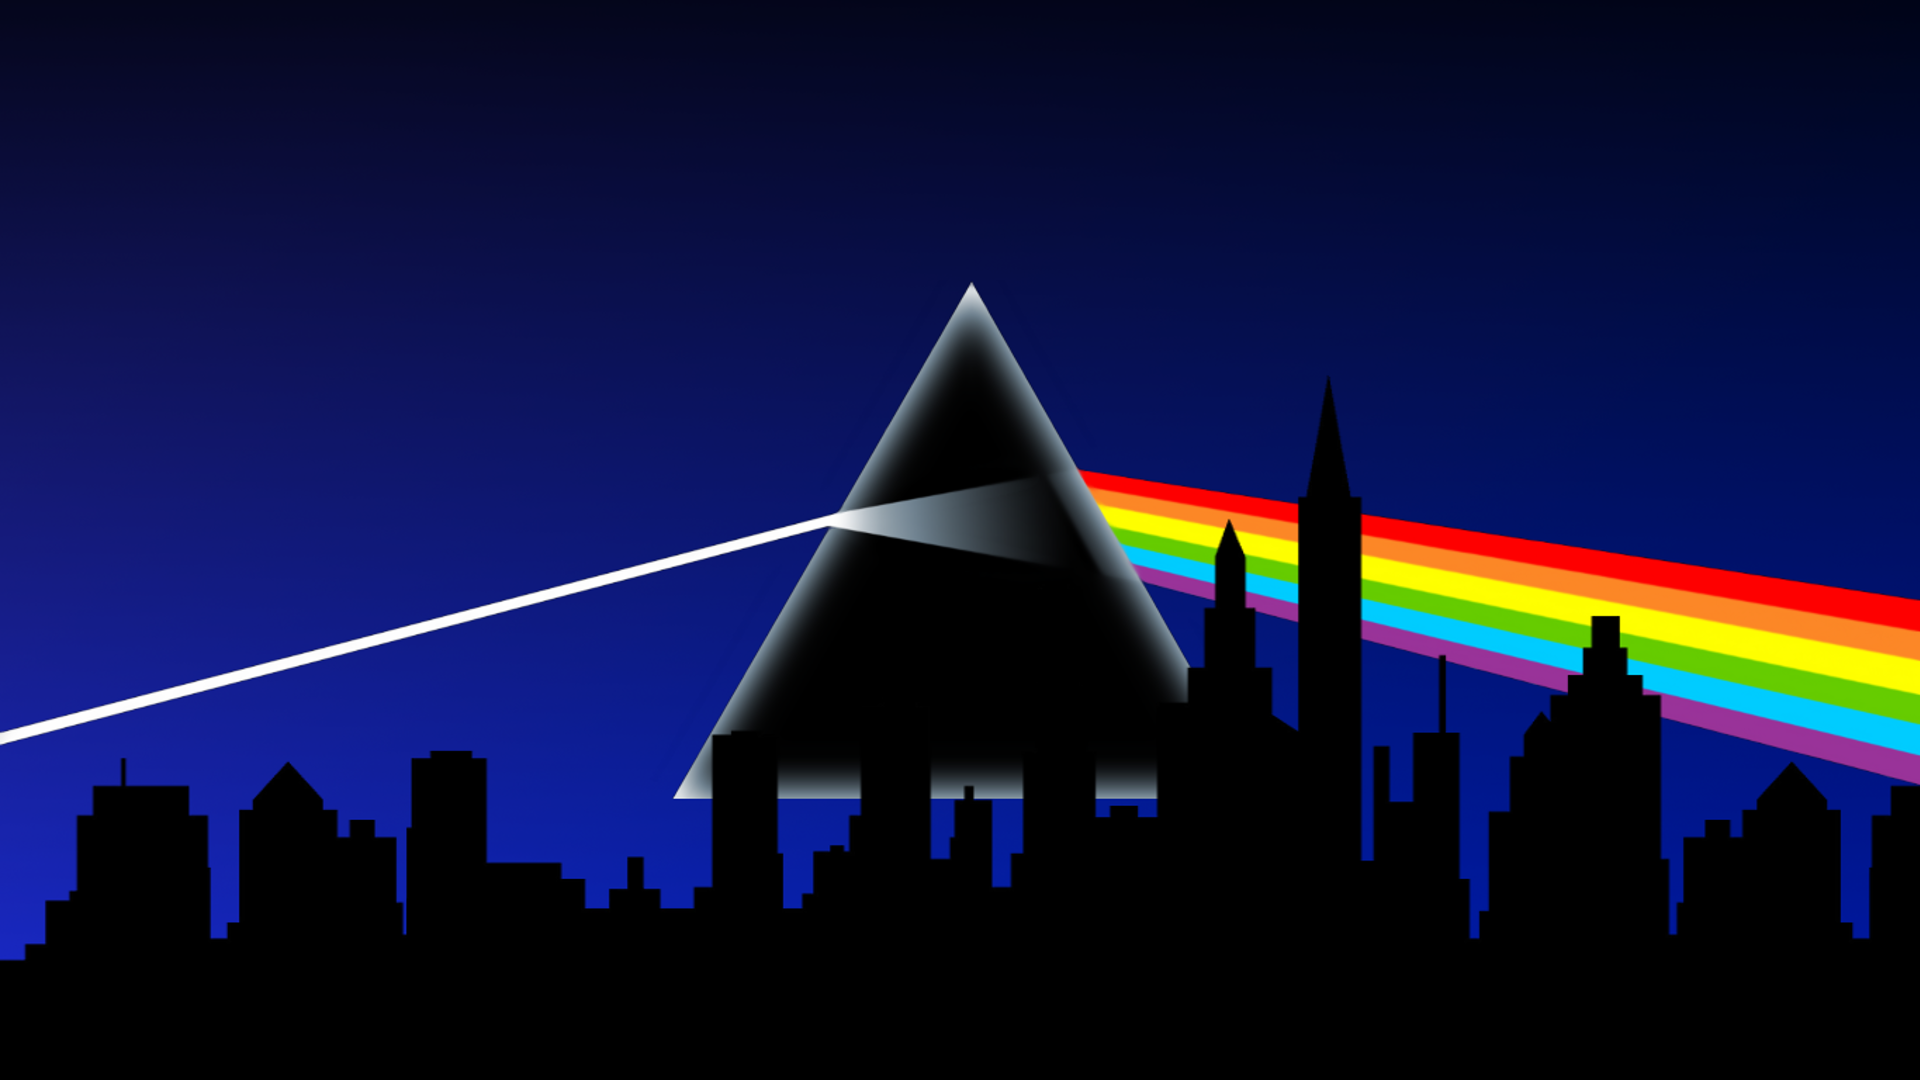 General 1920x1080 Pink Floyd album covers blue background cityscape abstract triangle